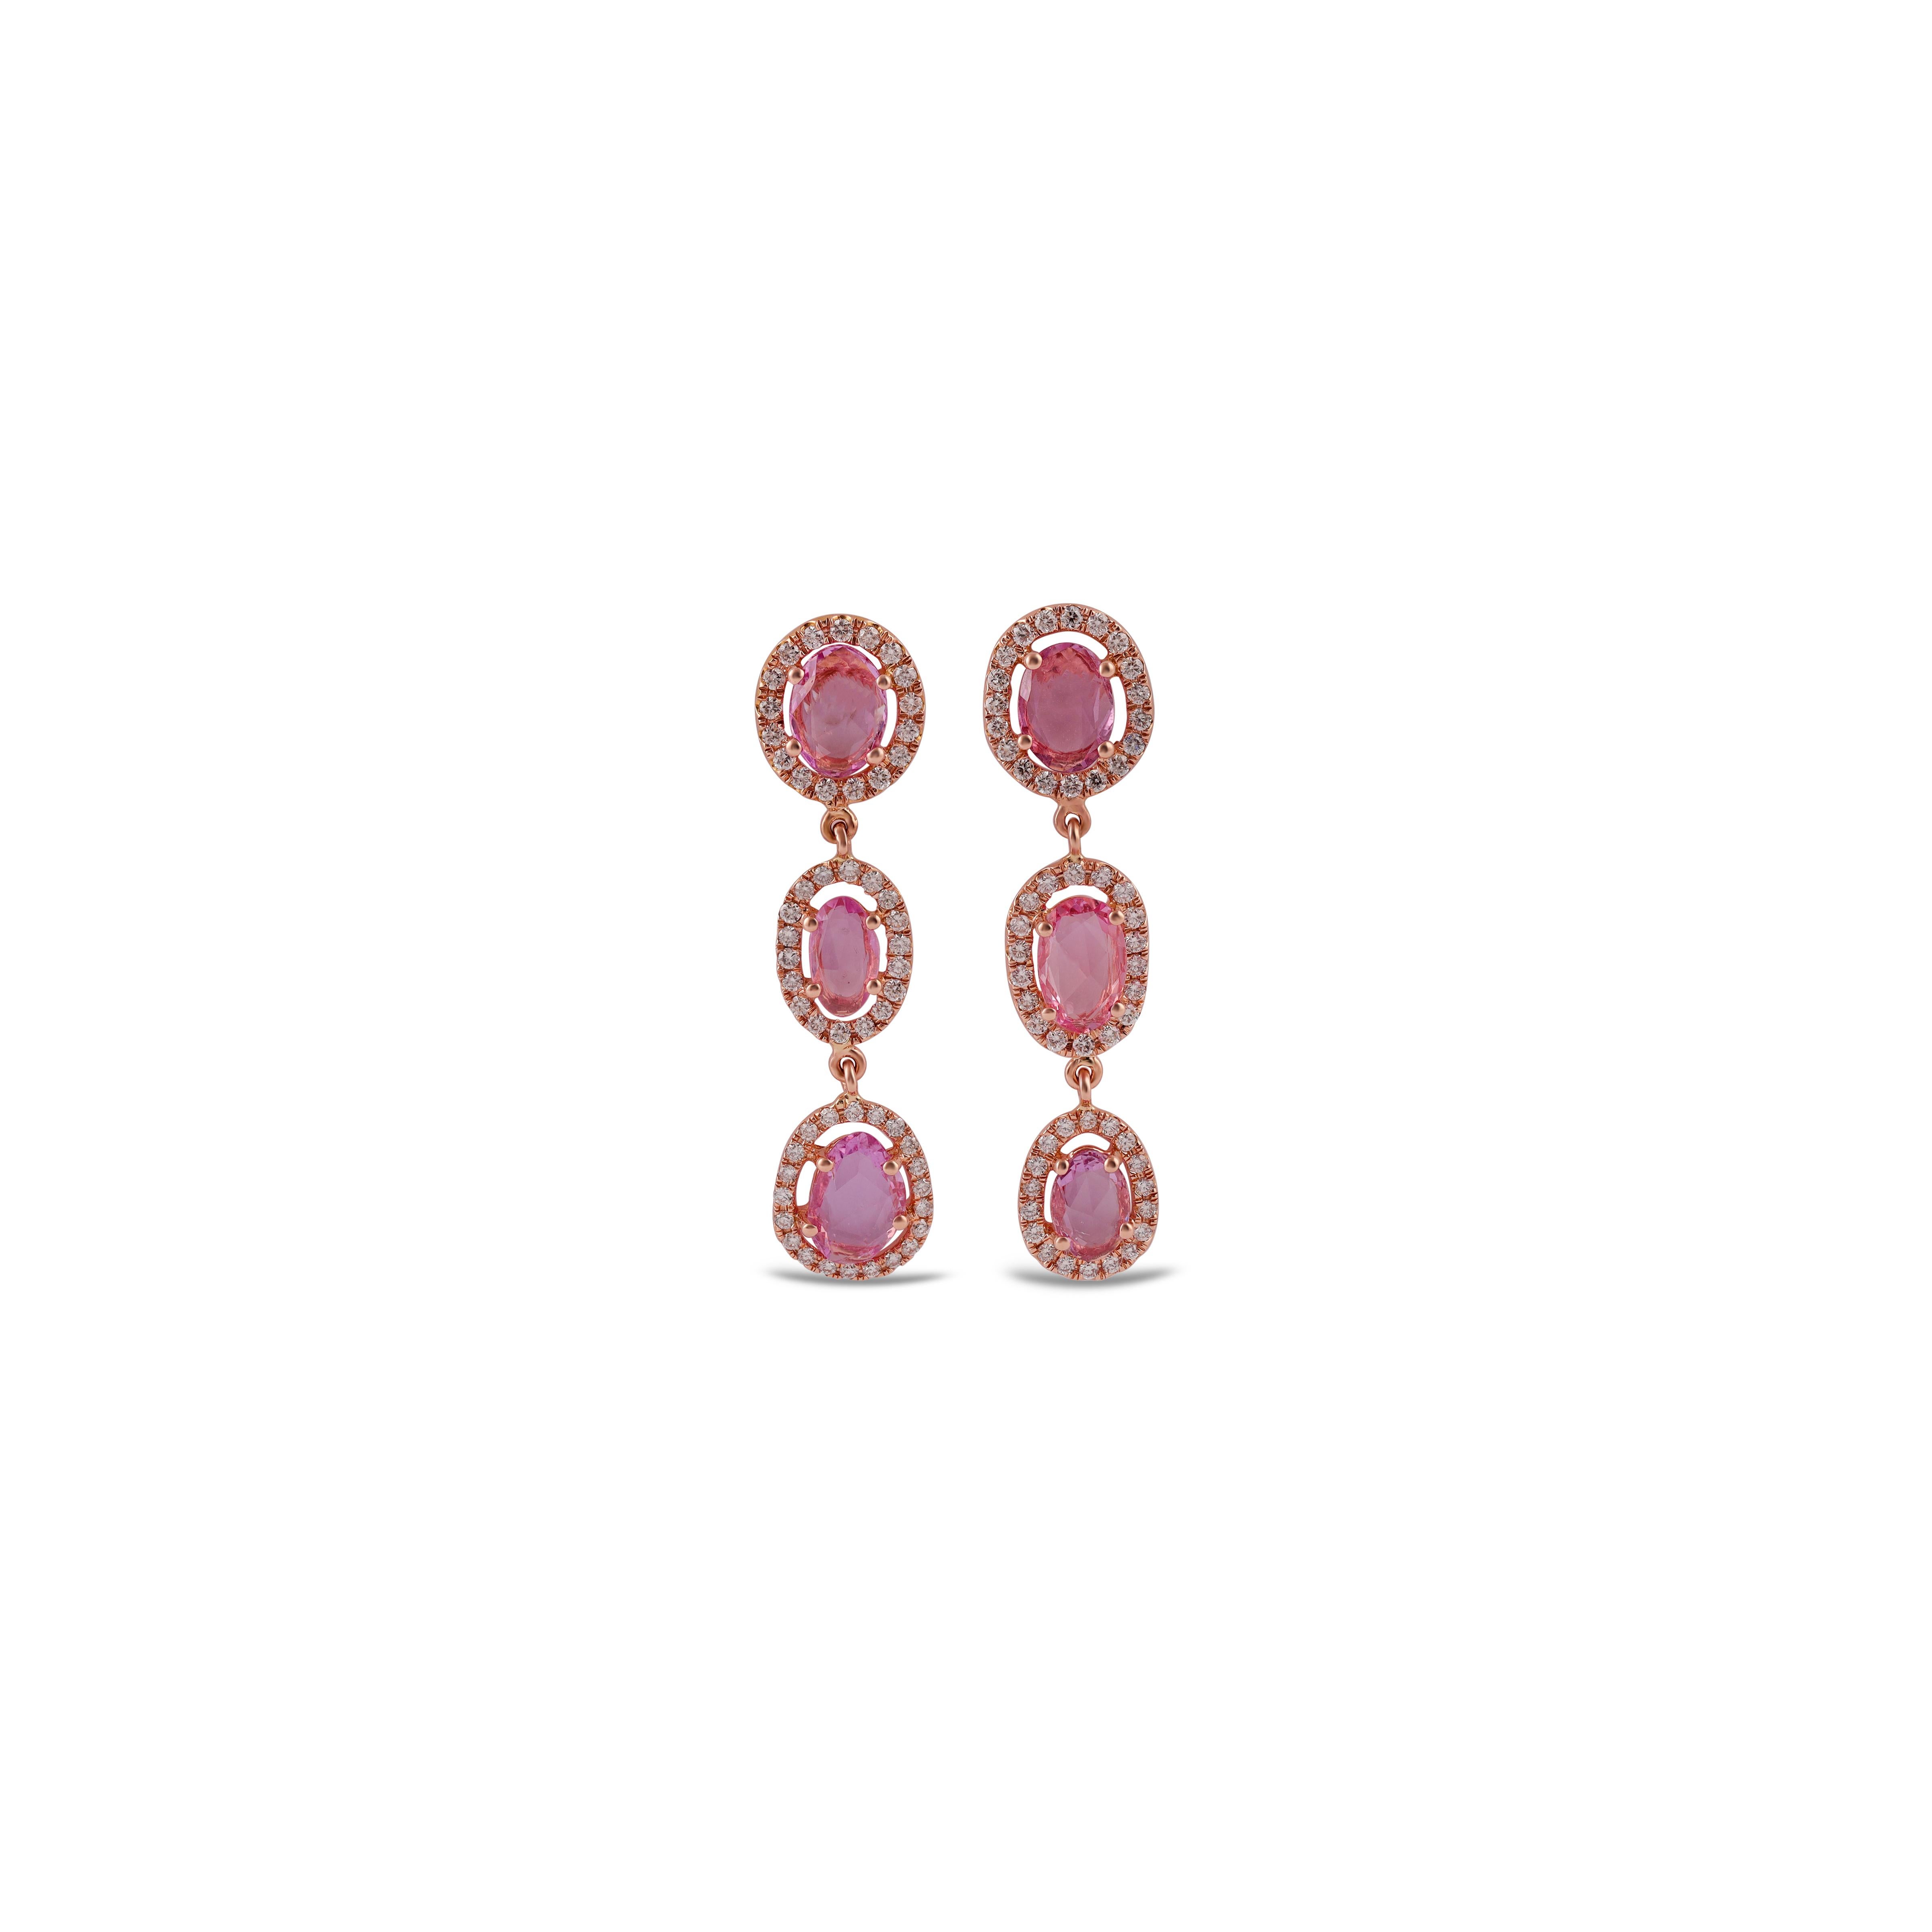 Rose Cut Pink Sapphire and Diamond Earring Studded in 18 Karat Rose Gold For Sale